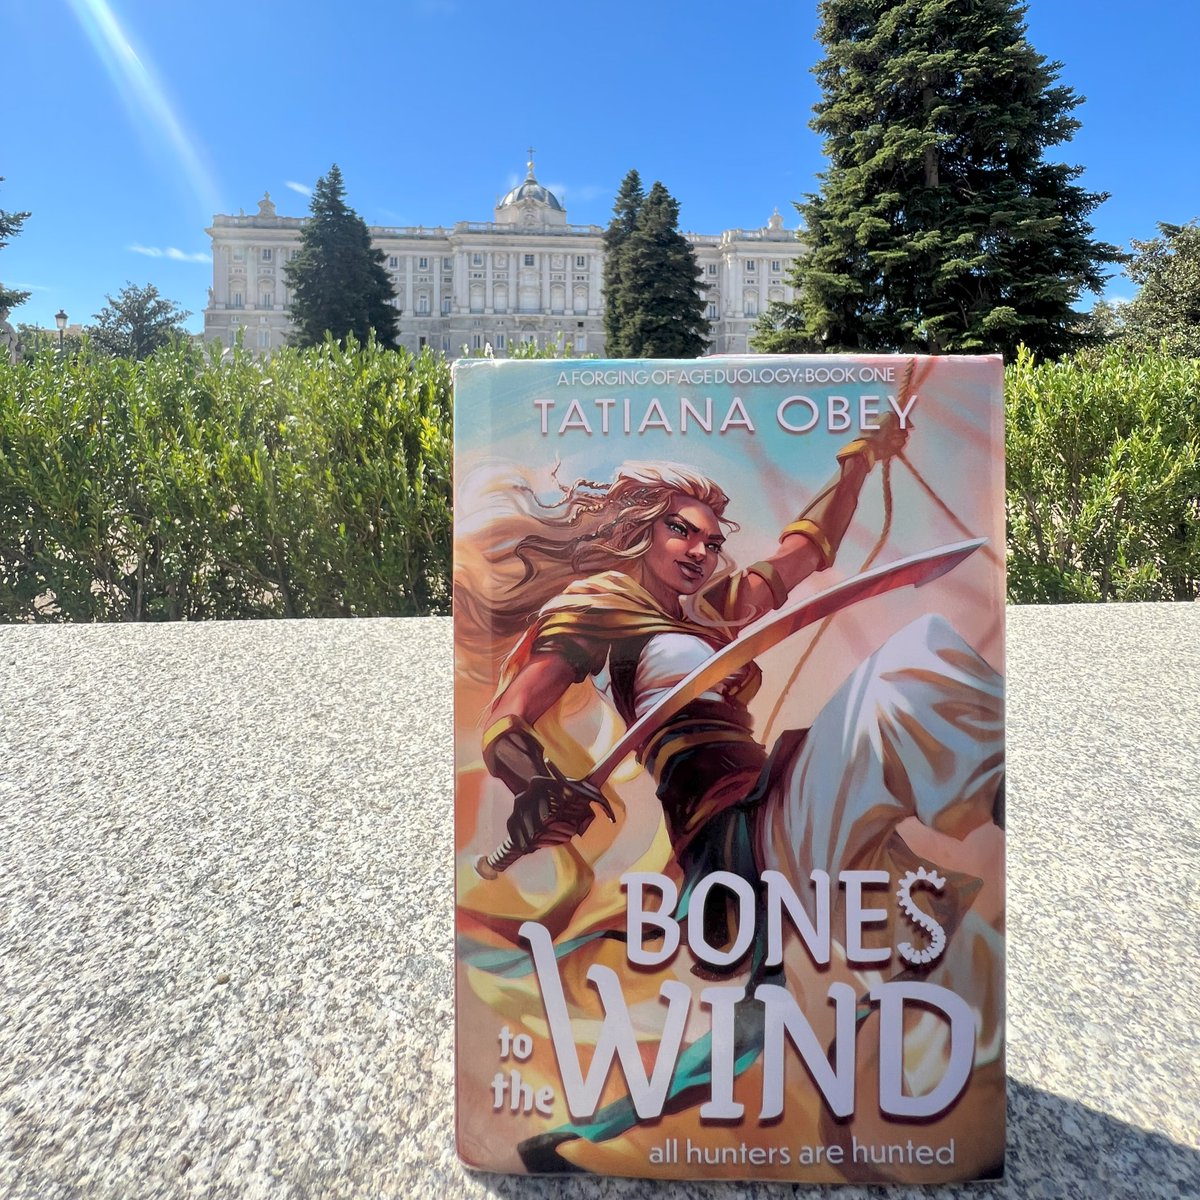 Rasia hanging out in the gardens of the Royal Palace of Madrid. 

Madrid, Spain 

#travelthursdays #thatbookthattravels #thatbooktravels